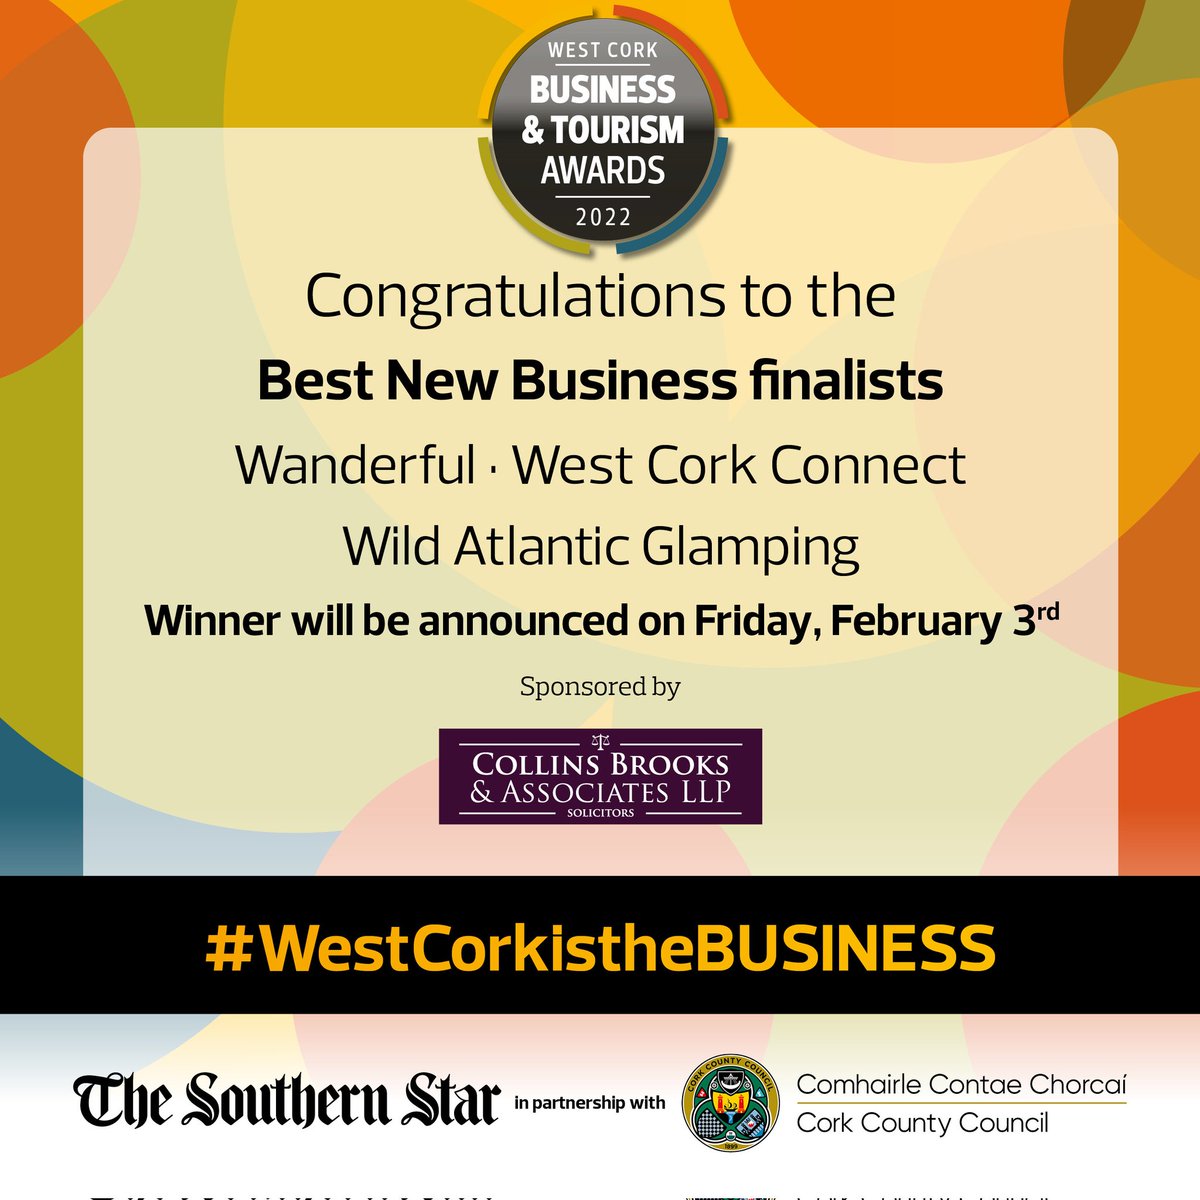 Congratulations to the Best New Business finalists! Sponsored by Collins, Brooks & Associates Wanderful @Wcorkconnect @WAGlamping #WestCorkistheBUSINESS